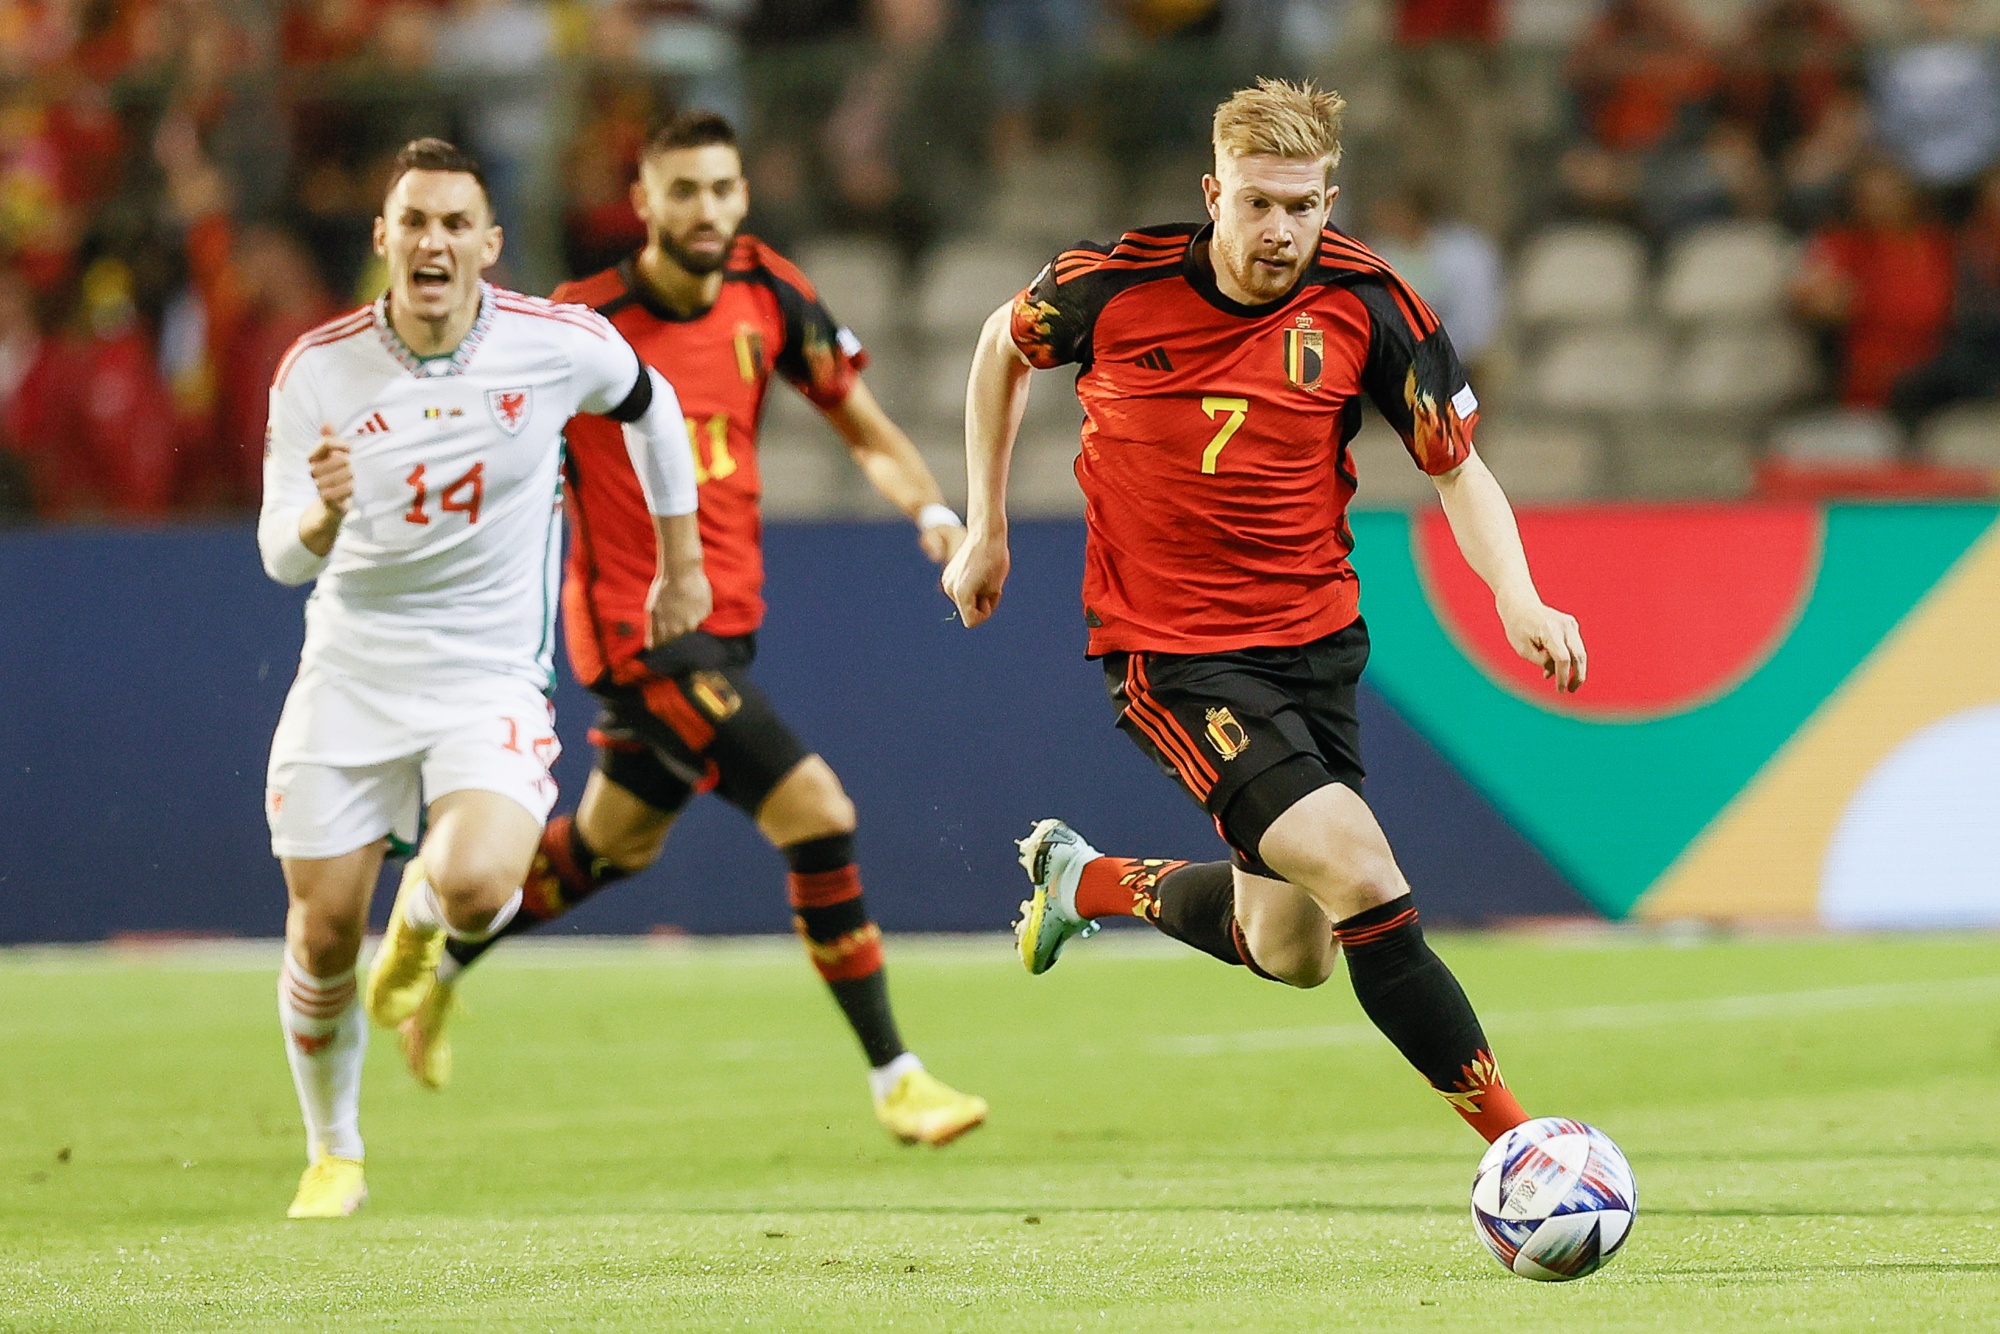 Welsh Connor Roberts and Belgium's Kevin De Bruyne fight for the ball during a soccer game between Belgian national team the Red Devils and Wales, Thursday 22 September 2022 in Brussels, game 5 (out of six) in the Nations League A group stage. BELGA PHOTO BRUNO FAHY